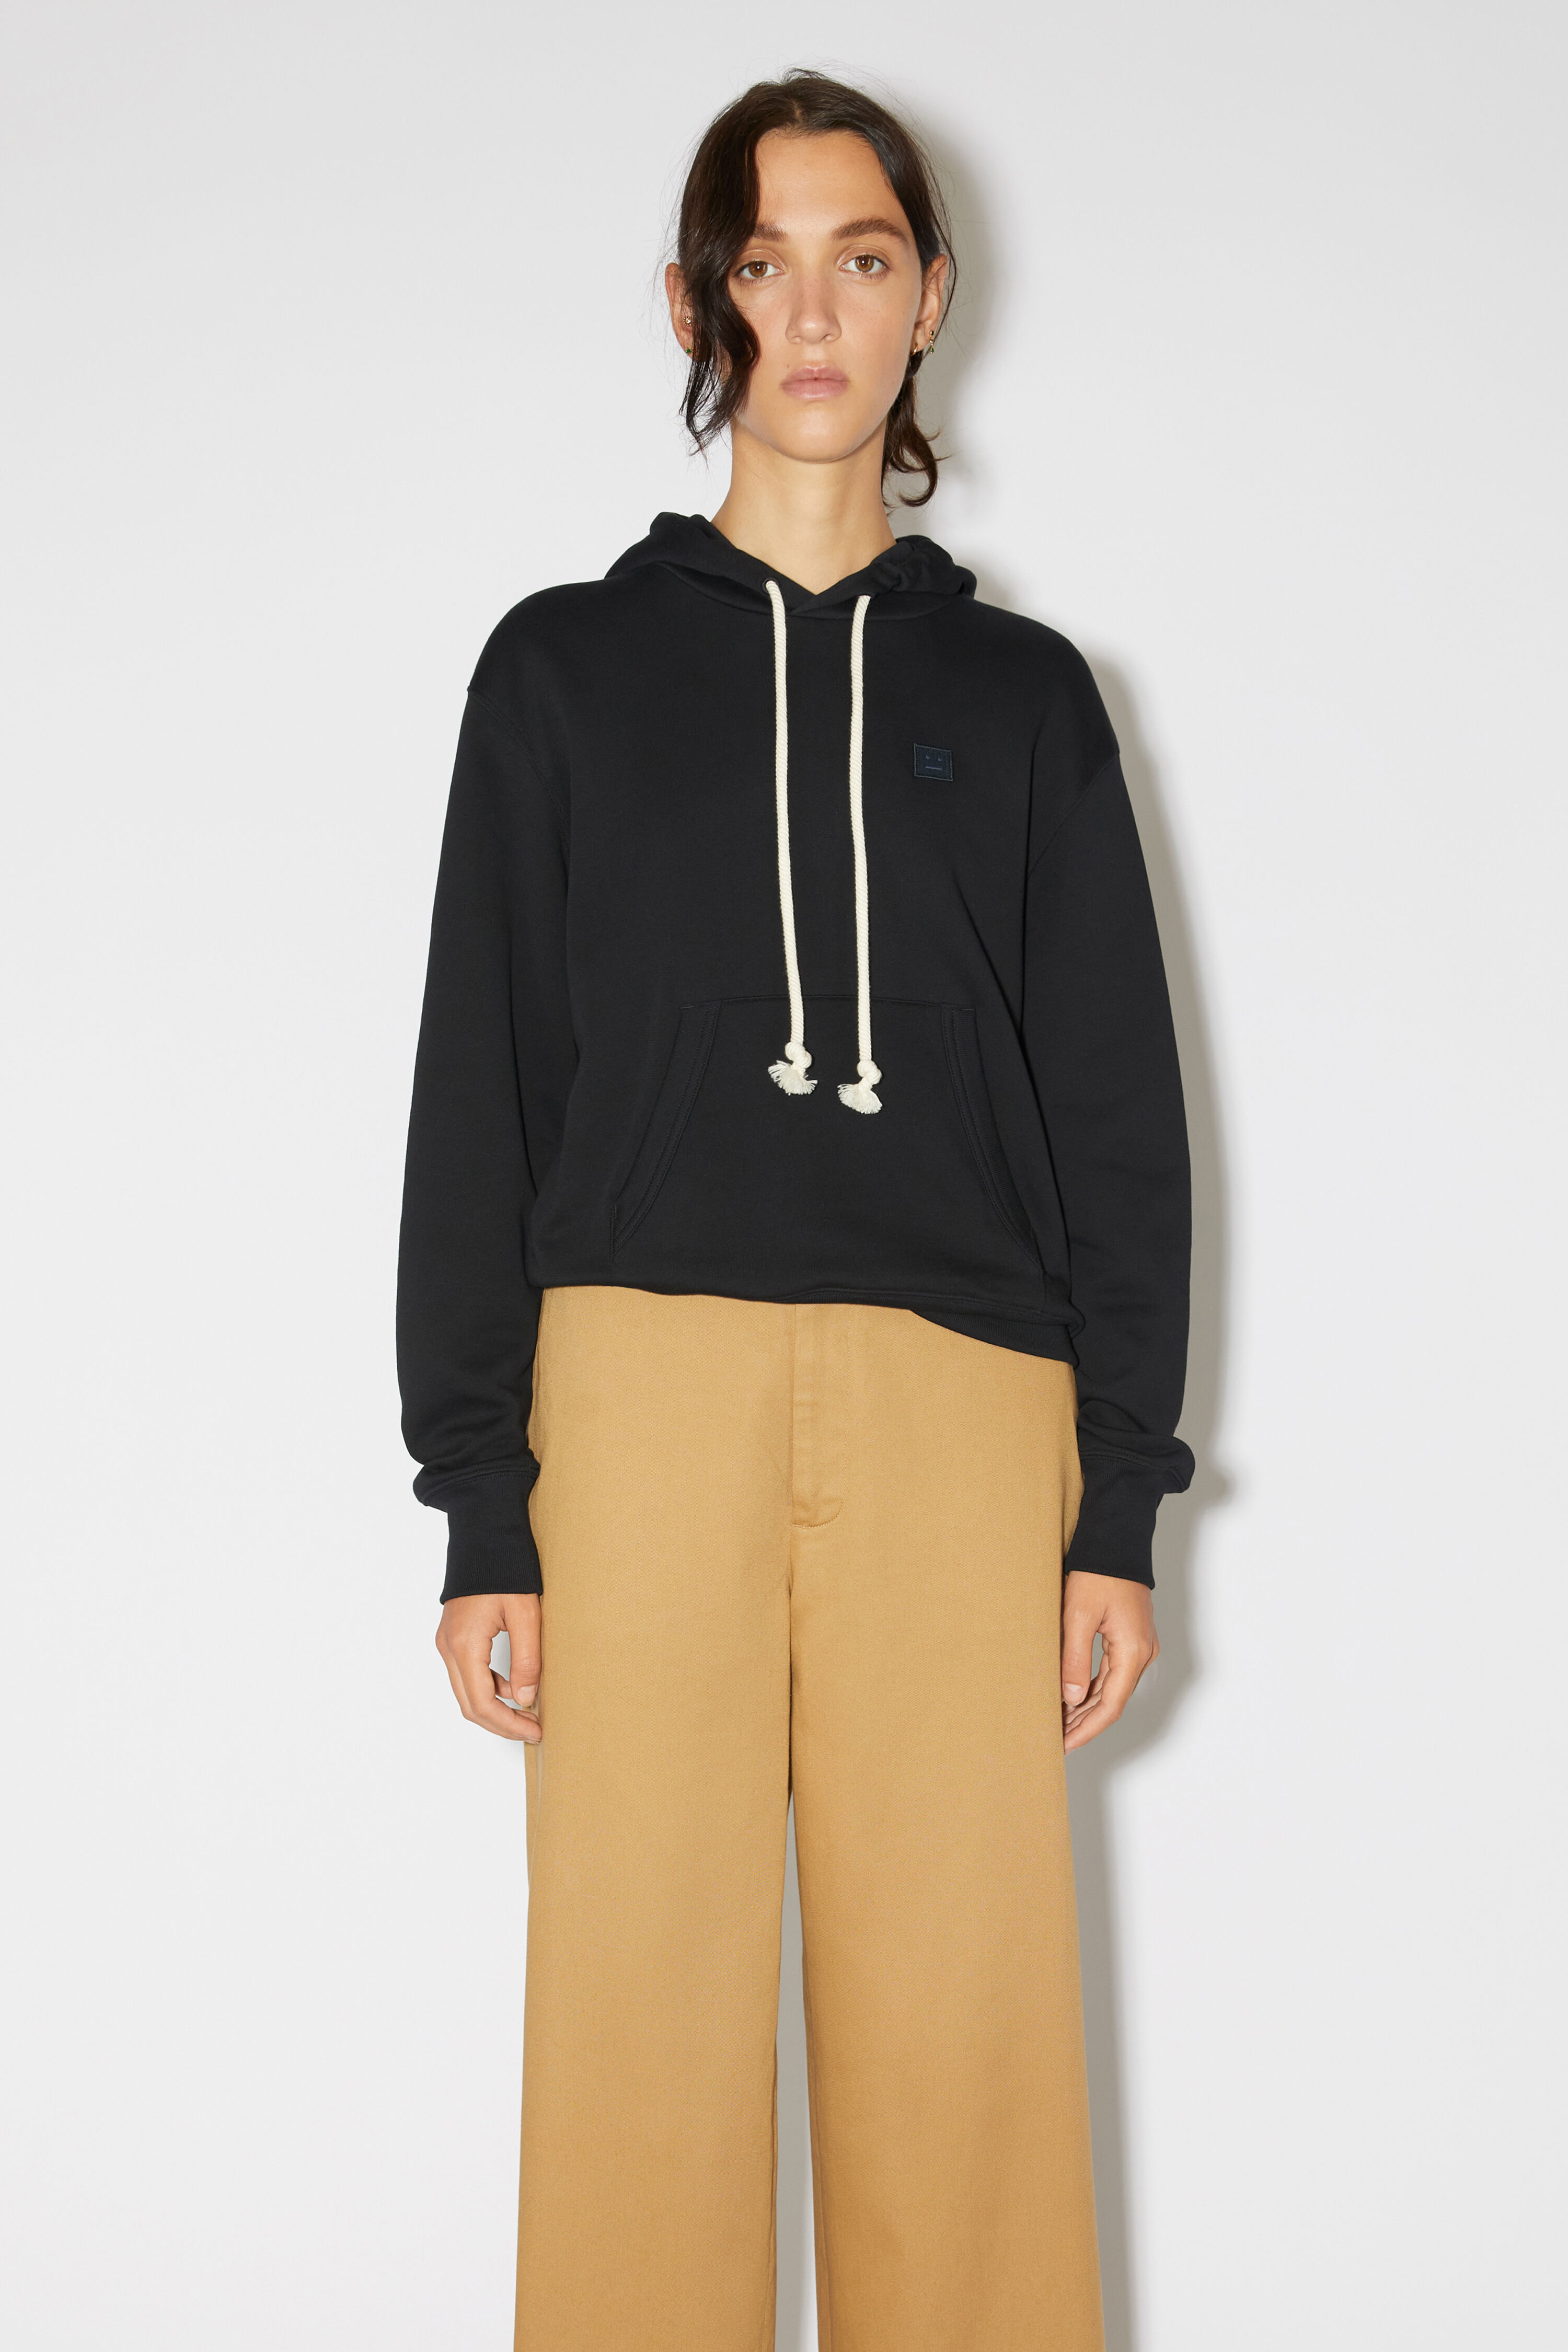 acne studios dog patch hoodie スウェット-